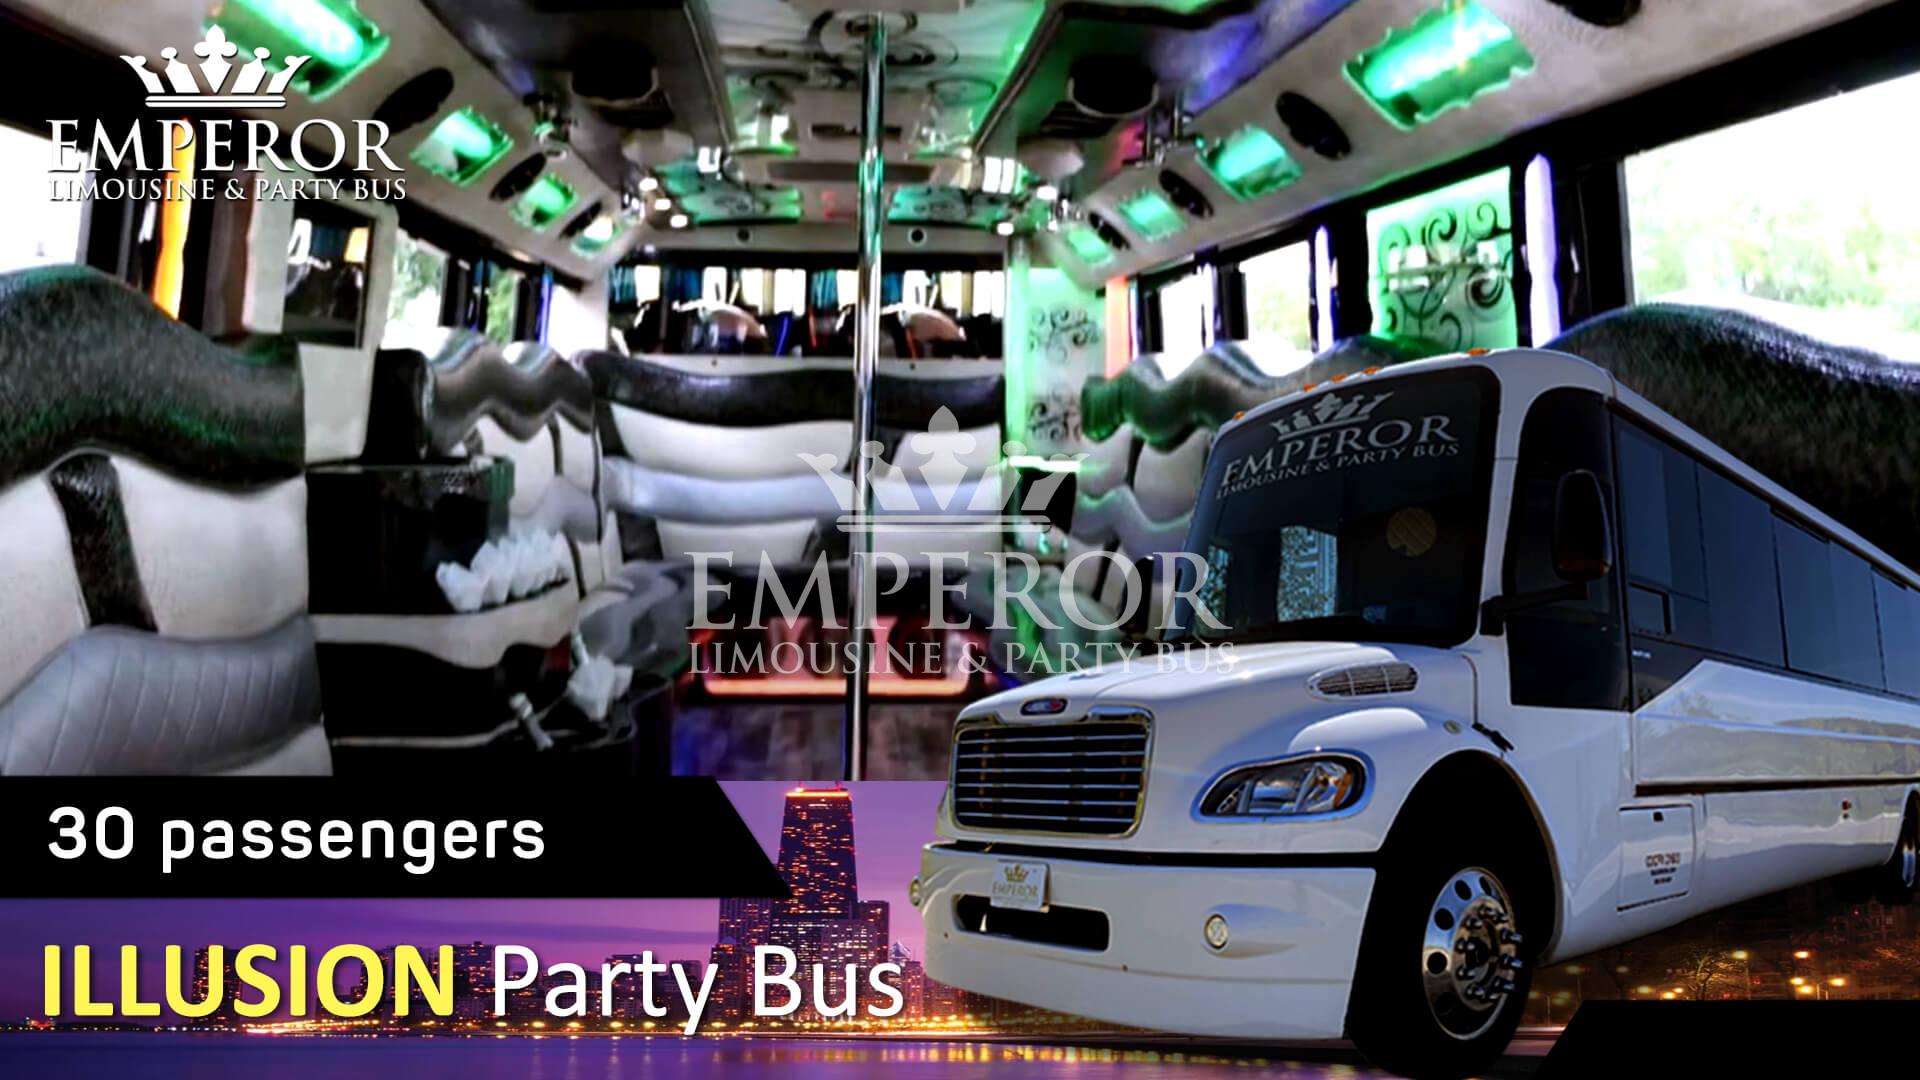 Hire Bachelor party bus - Illusion Edition